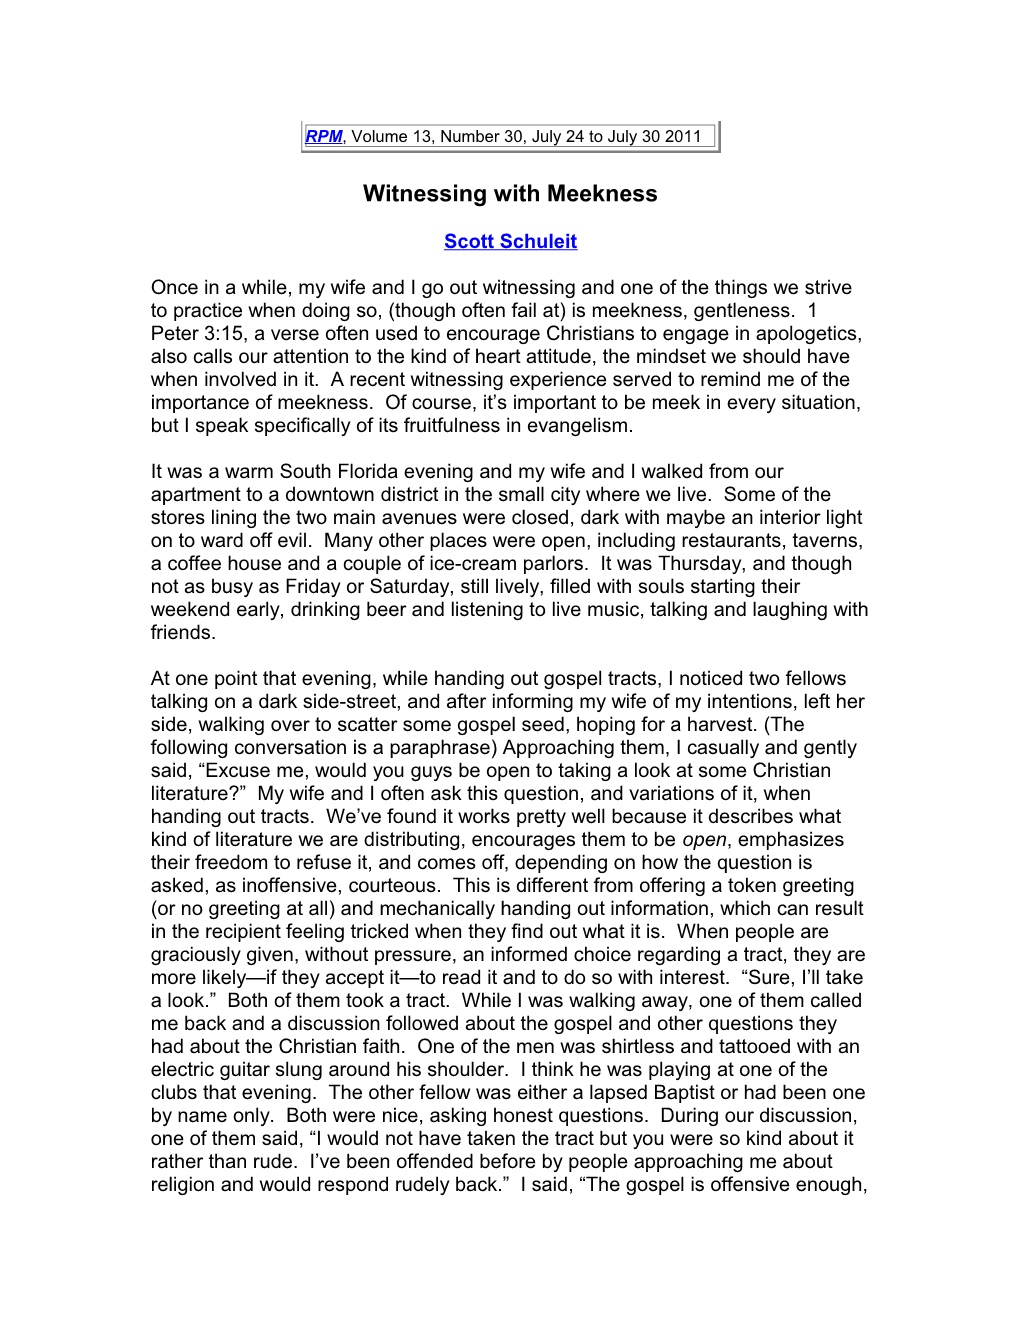 Witnessing with Meekness